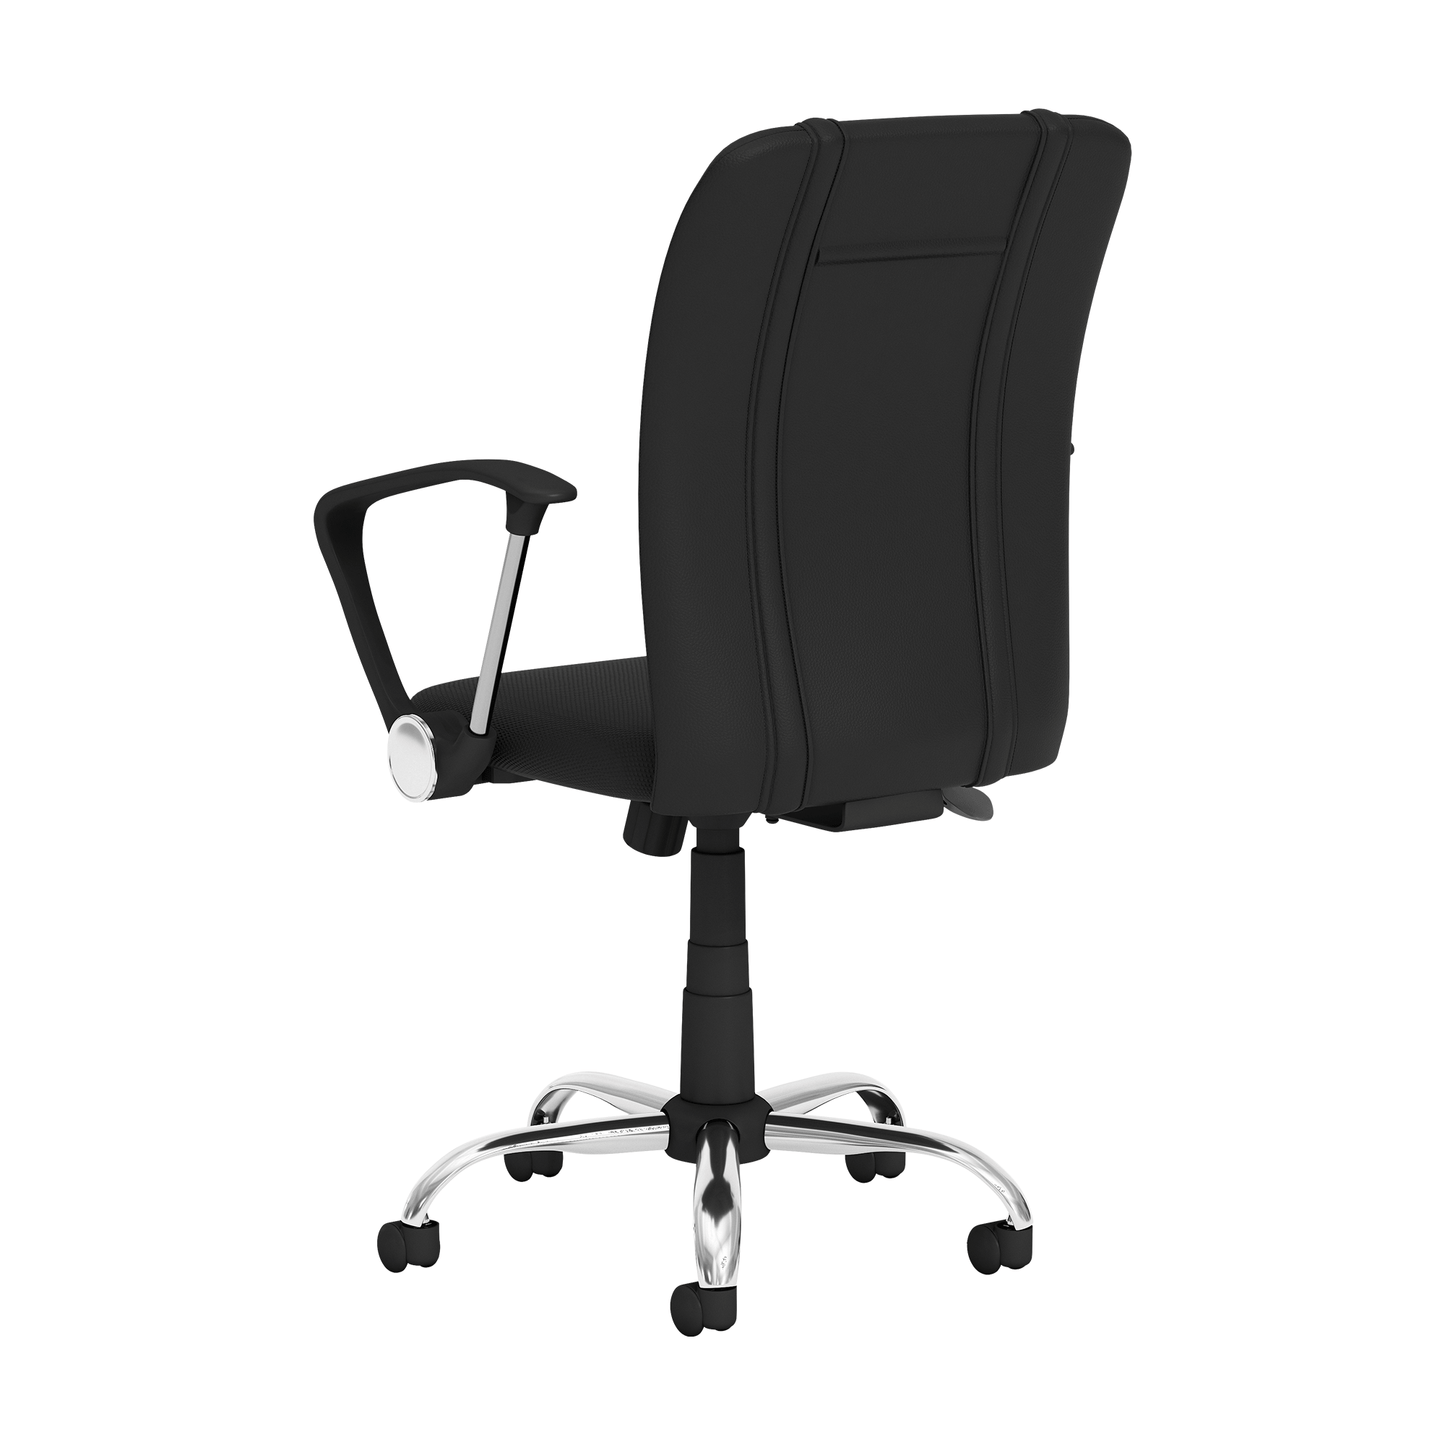 Tampa Bay Buccaneers Primary Super Bowl LV Logo Curve Task Chair